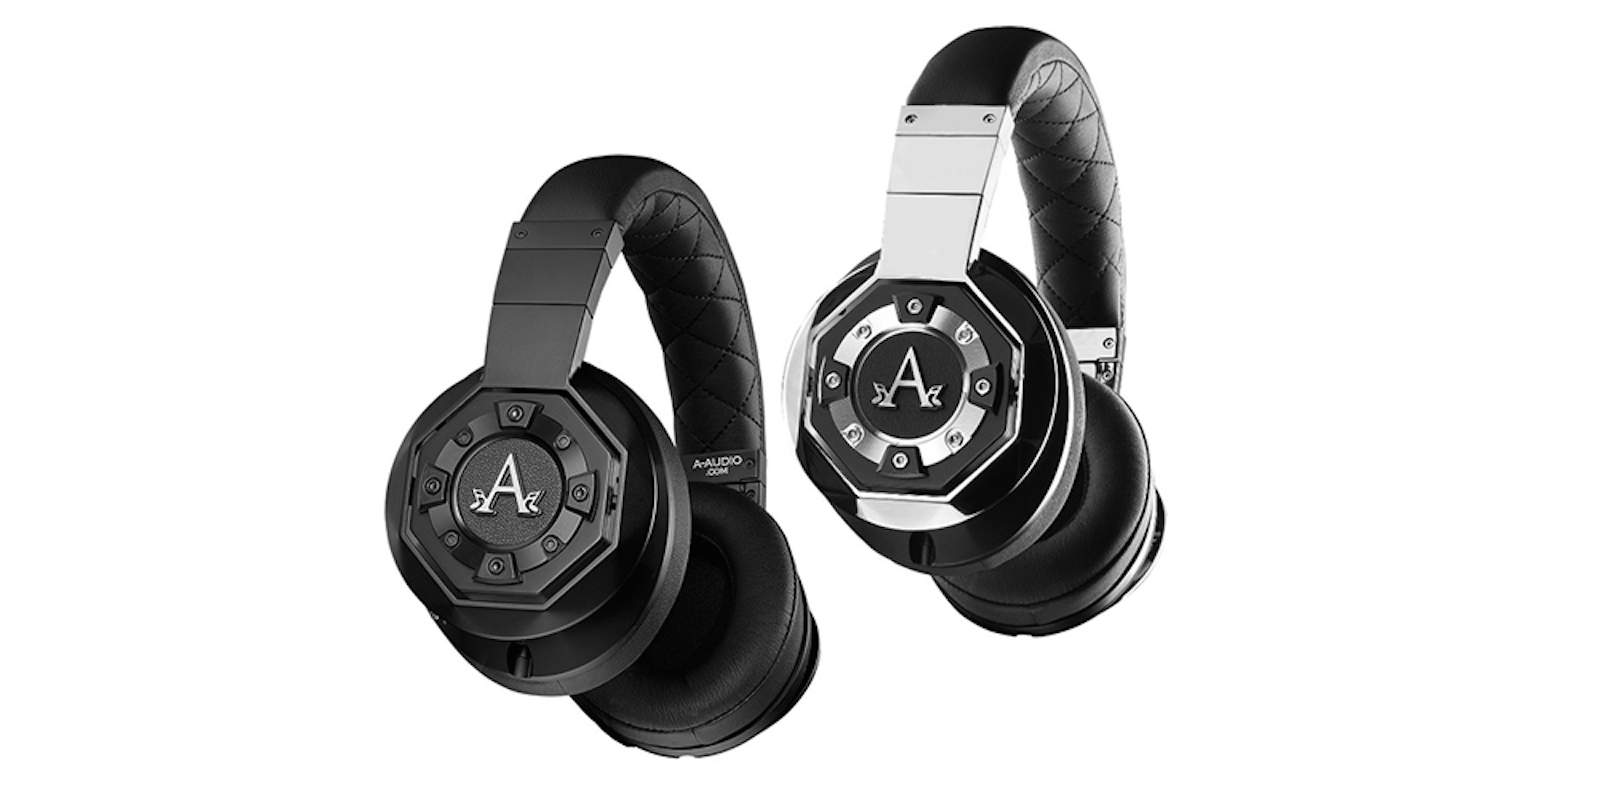 These noise-canceling headphones were built for those who know what they're listening for.